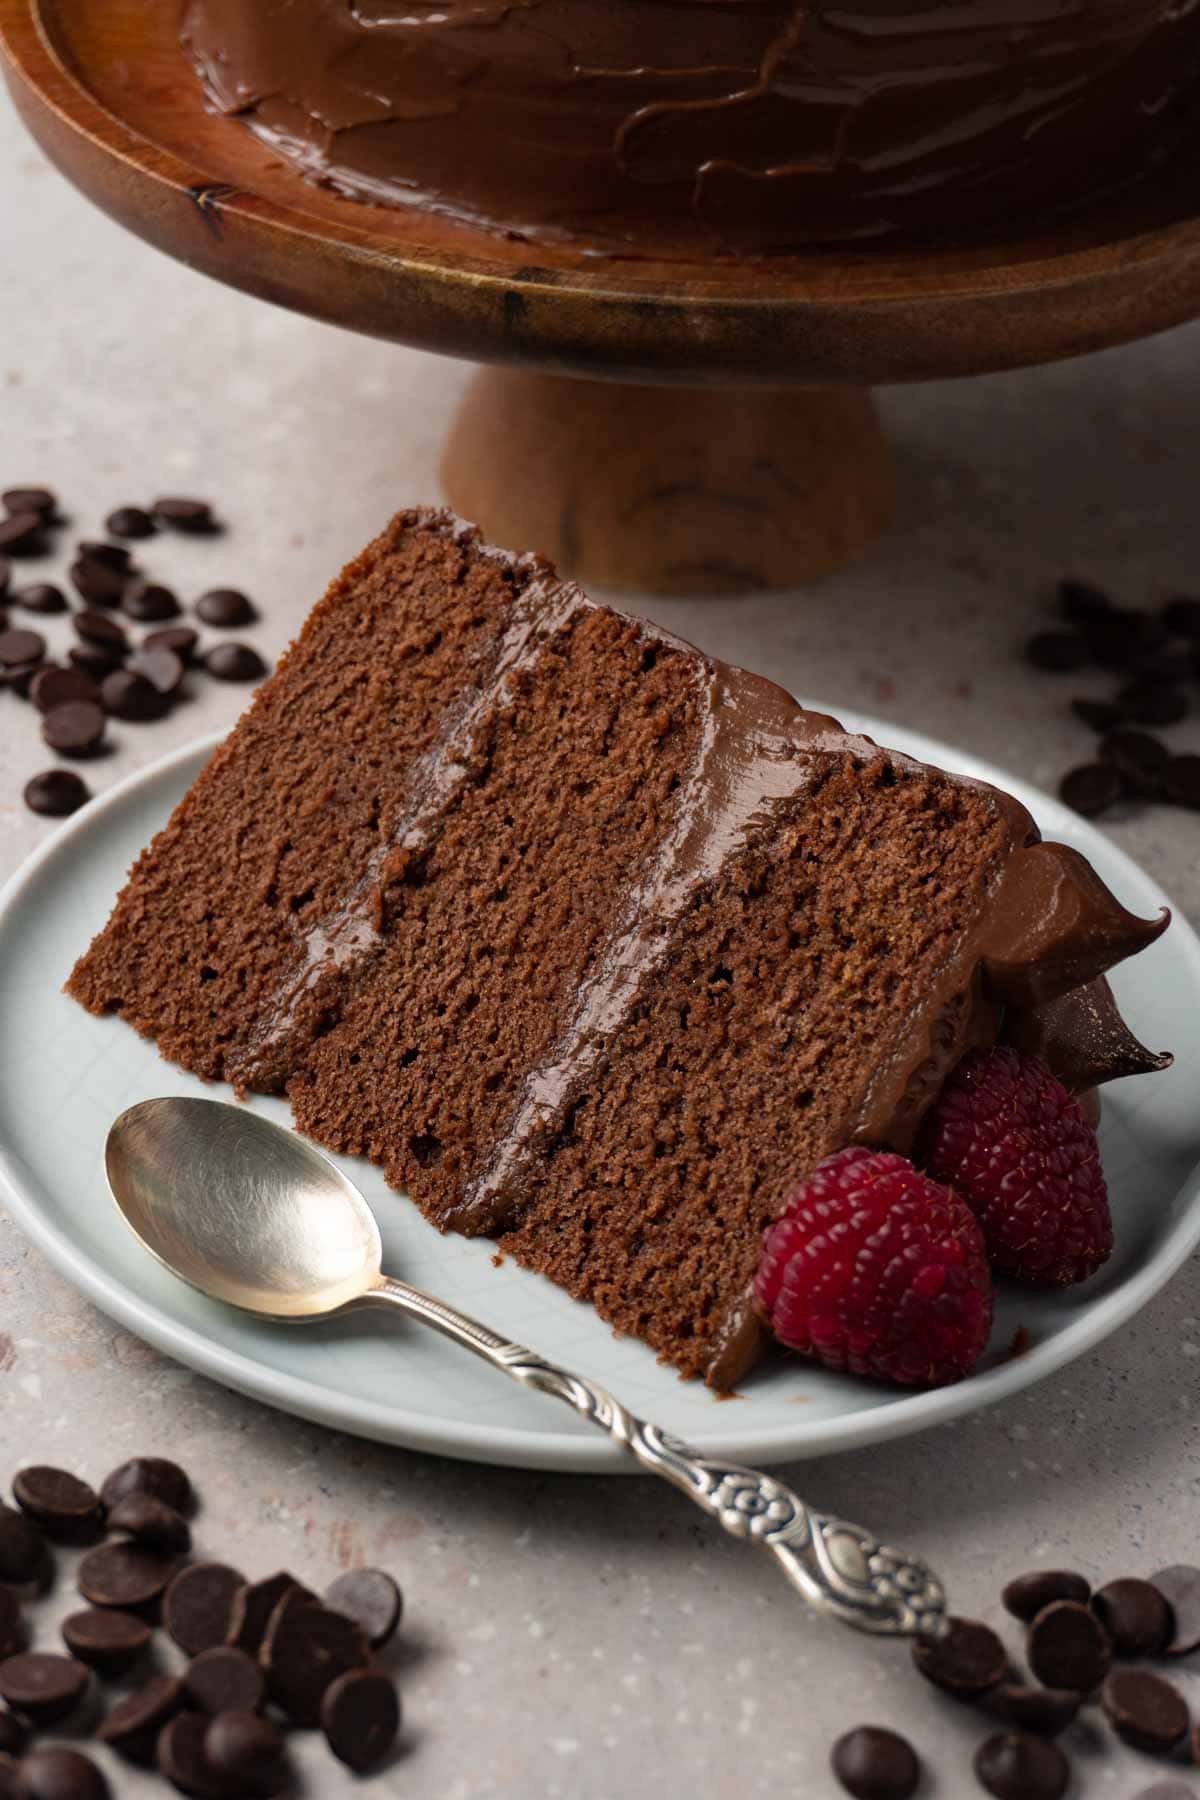 A piece of chocolate cake with fresh raspberries on a round plate, chocolate chips are lying around the plate.